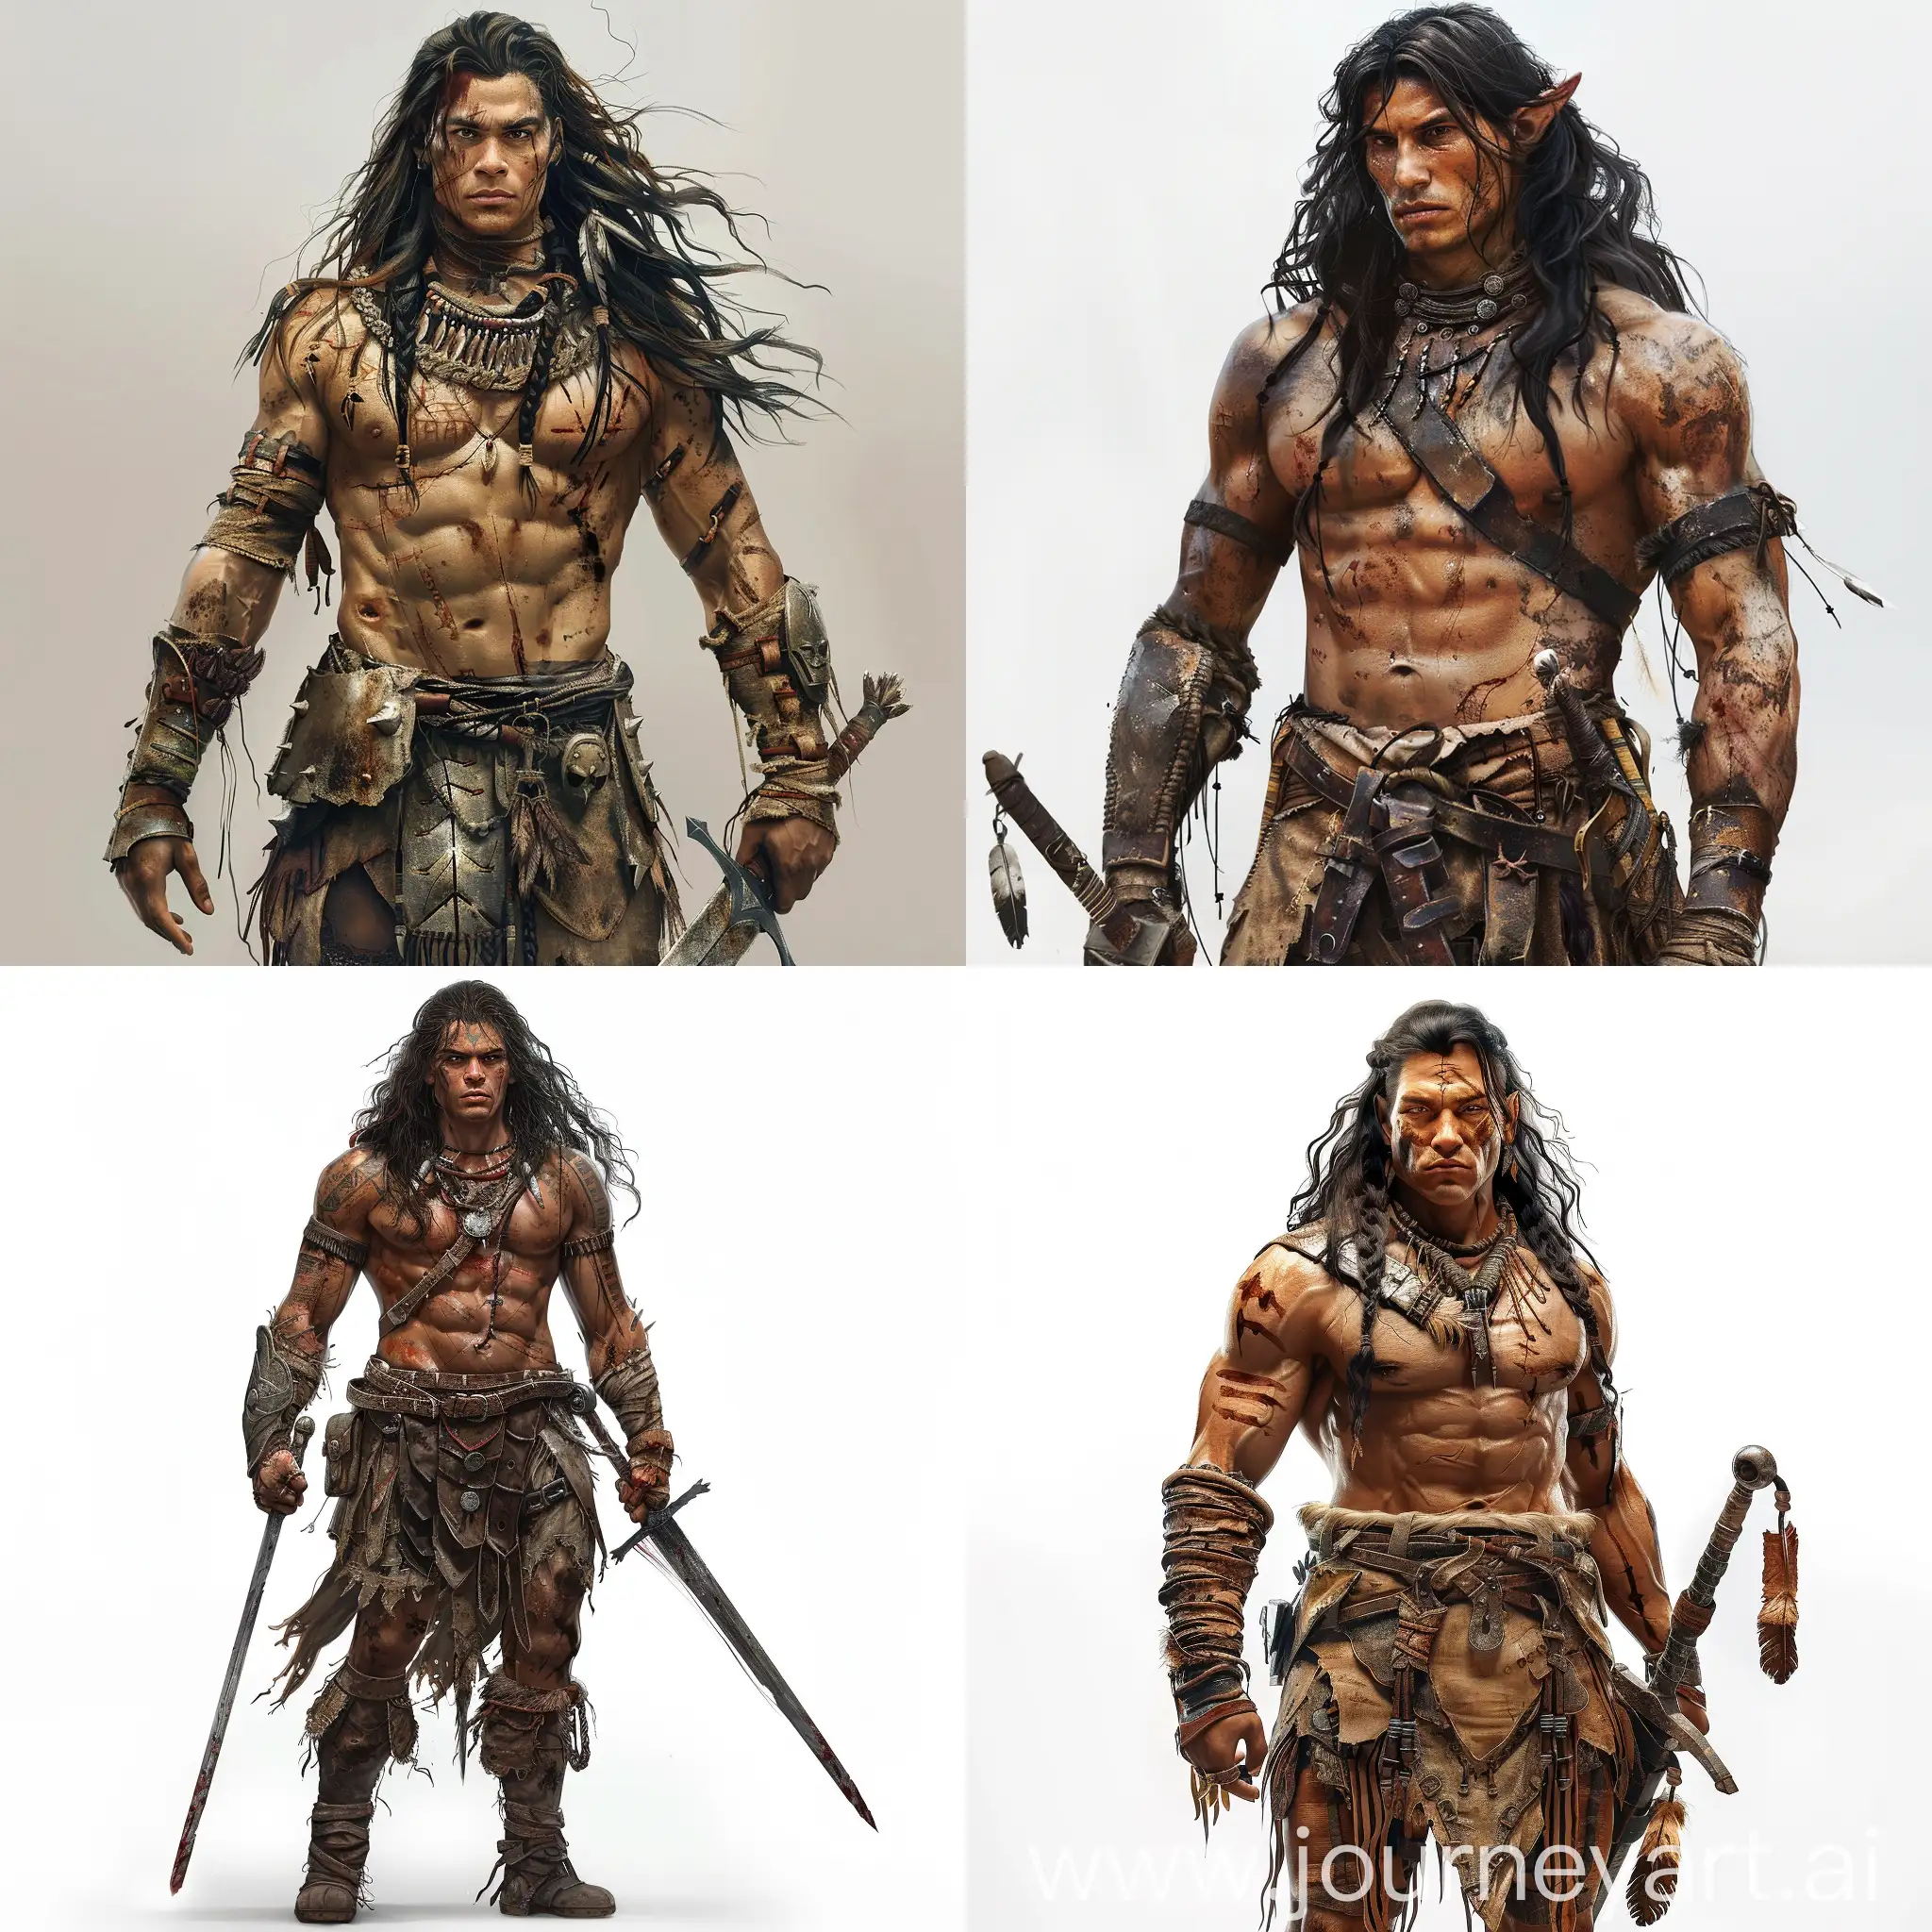 Native-American-Warrior-in-Mismatched-Armor-with-Long-Sword